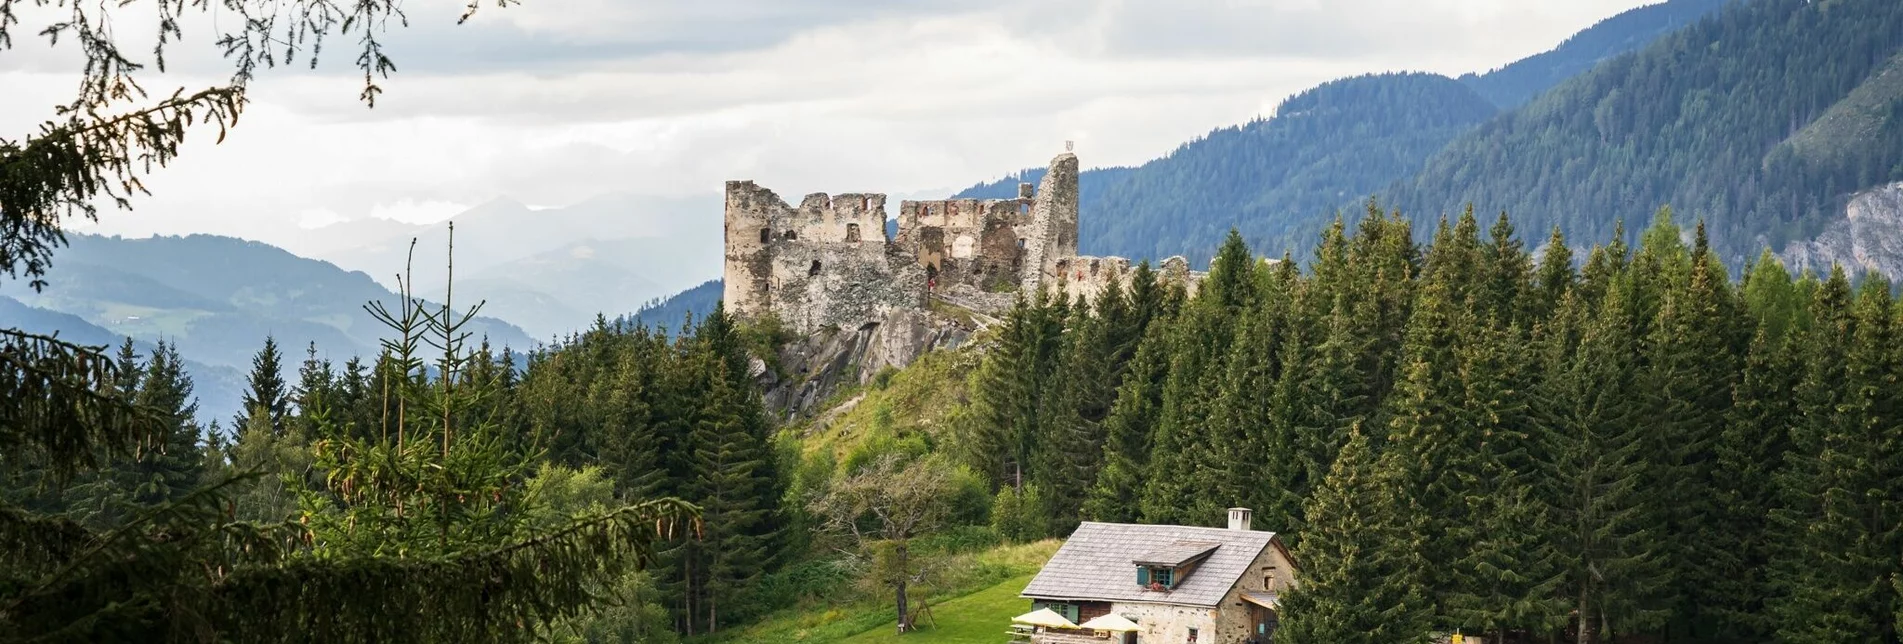 Hiking route From the “Old Smithy” to the stone castle - Touren-Impression #1 | © Tourismusverband Murau